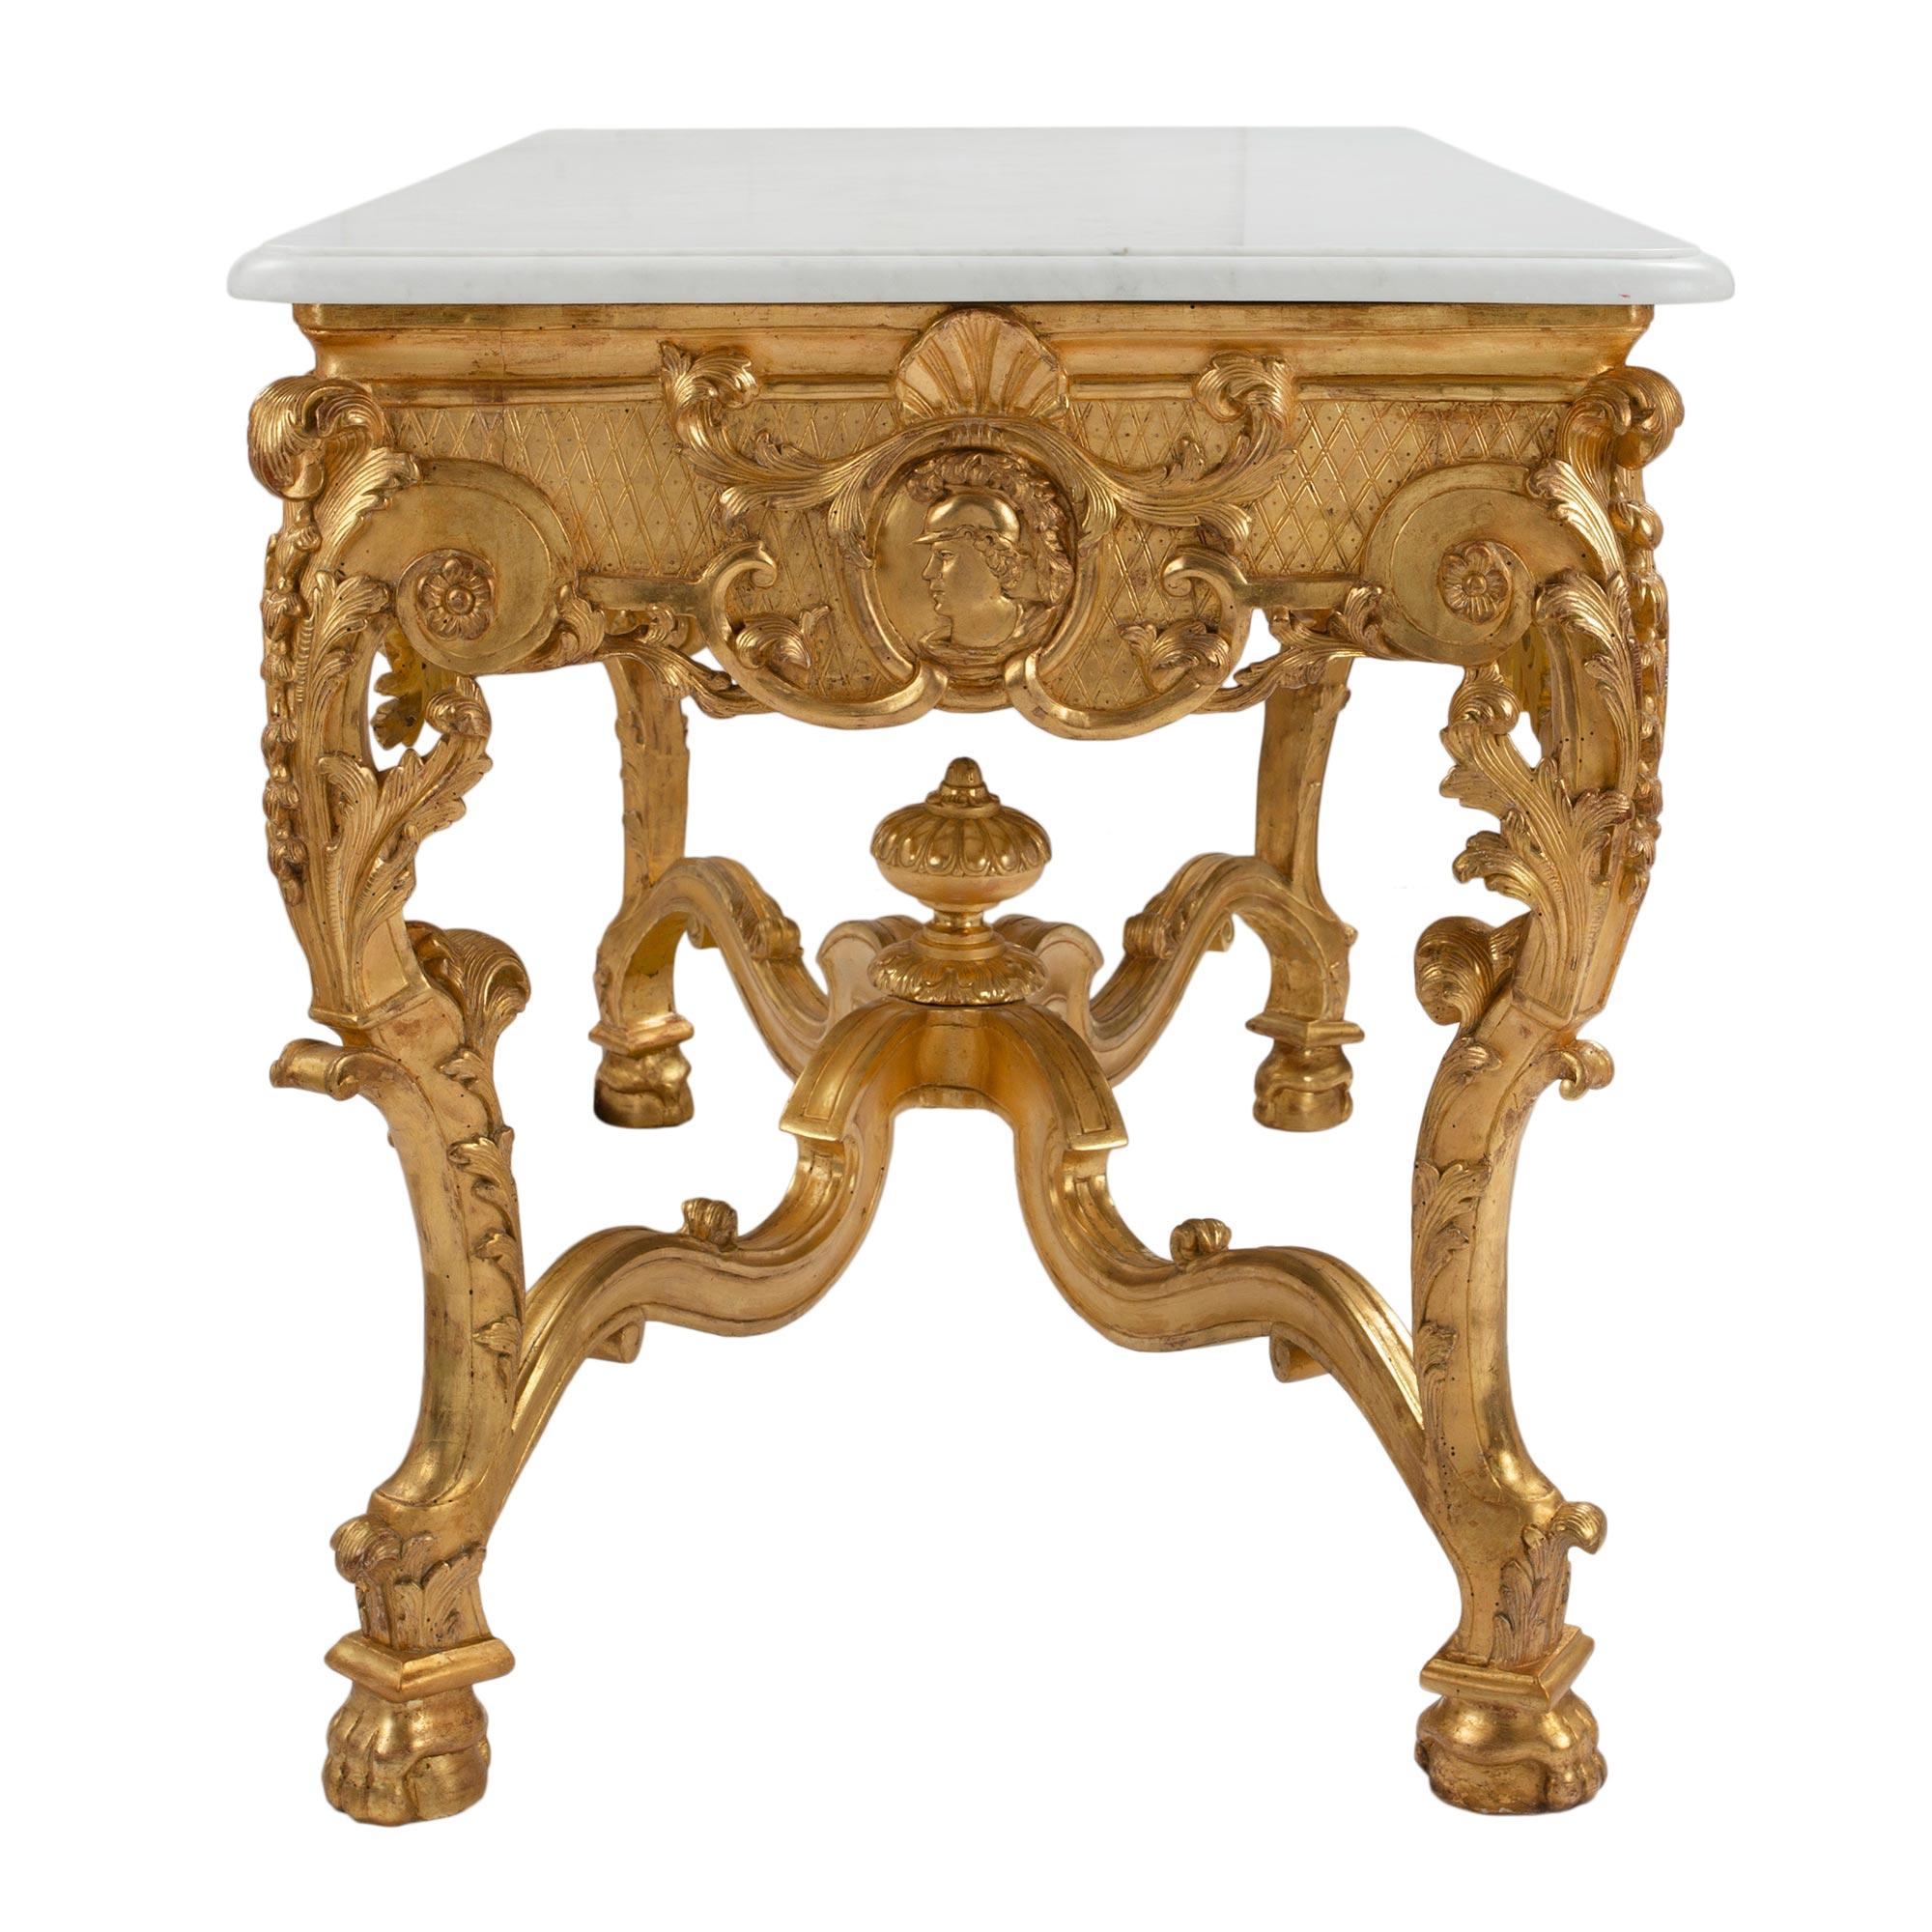 French 19th Century Regency Style Giltwood and Carrara Marble Centre Table For Sale 1